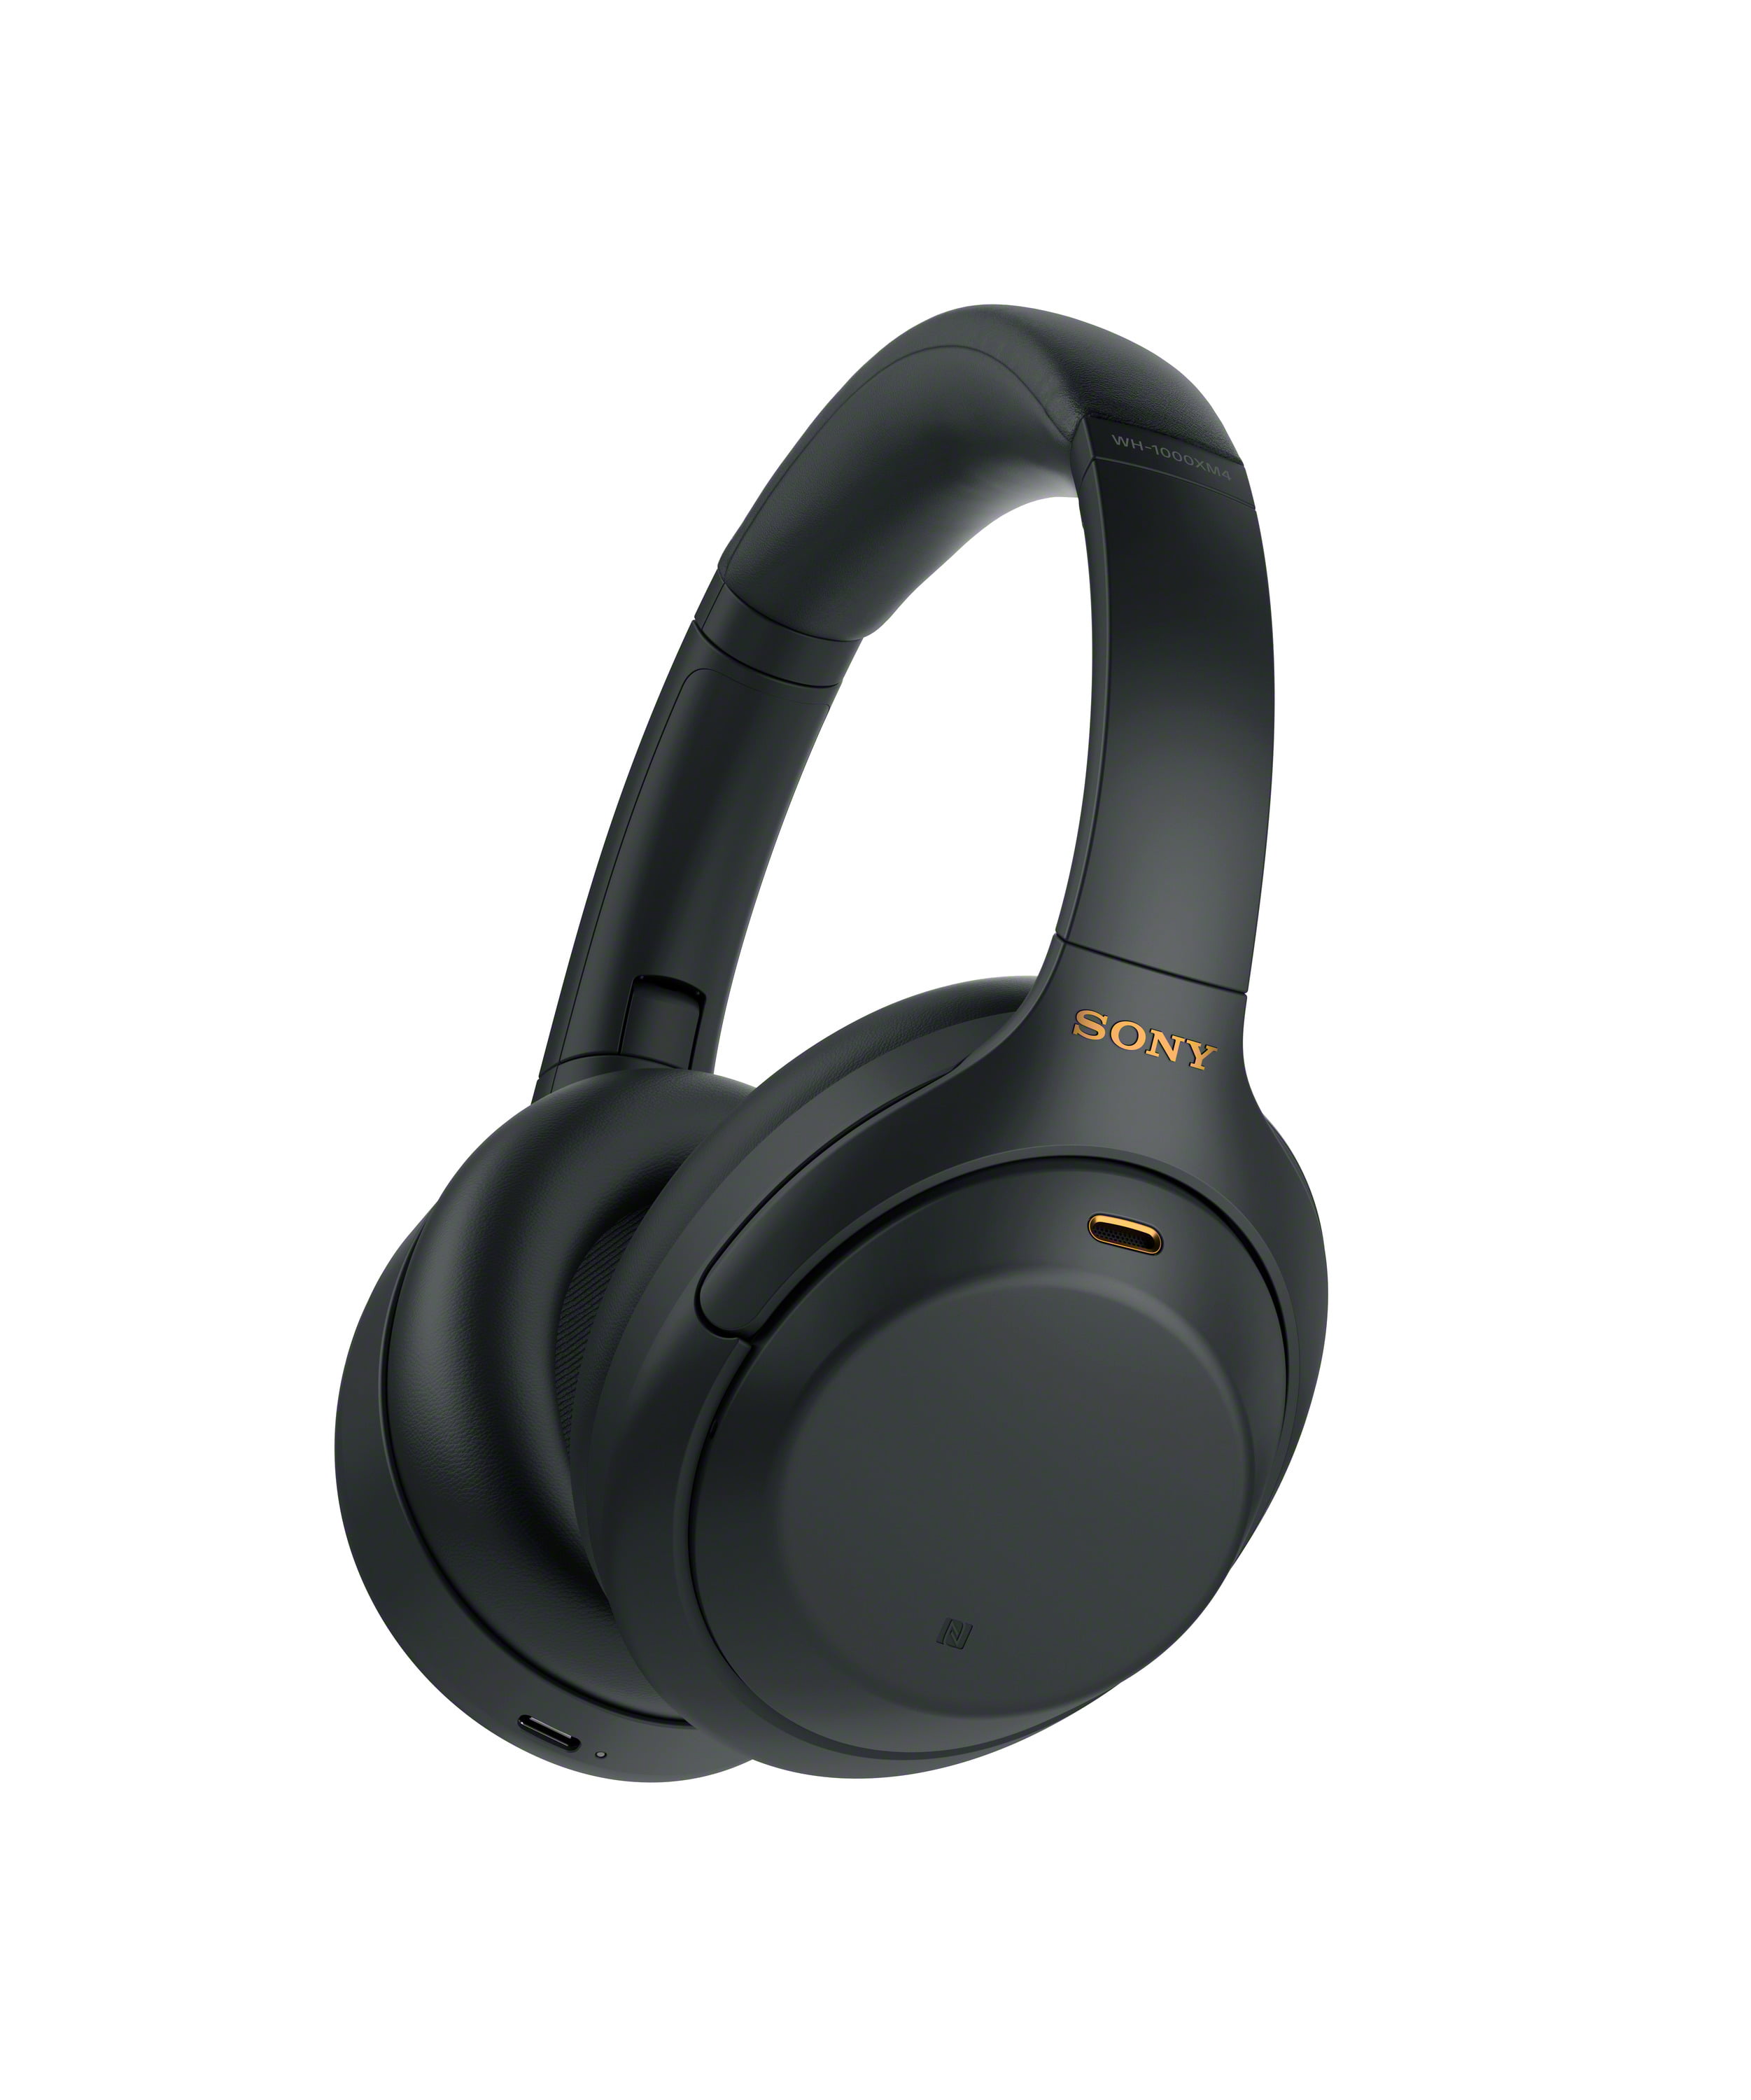 Sony WH-1000XM4 Wireless Noise Canceling Over-the-Ear Headphones with Google Assistant - Black $264.99 at Walmart